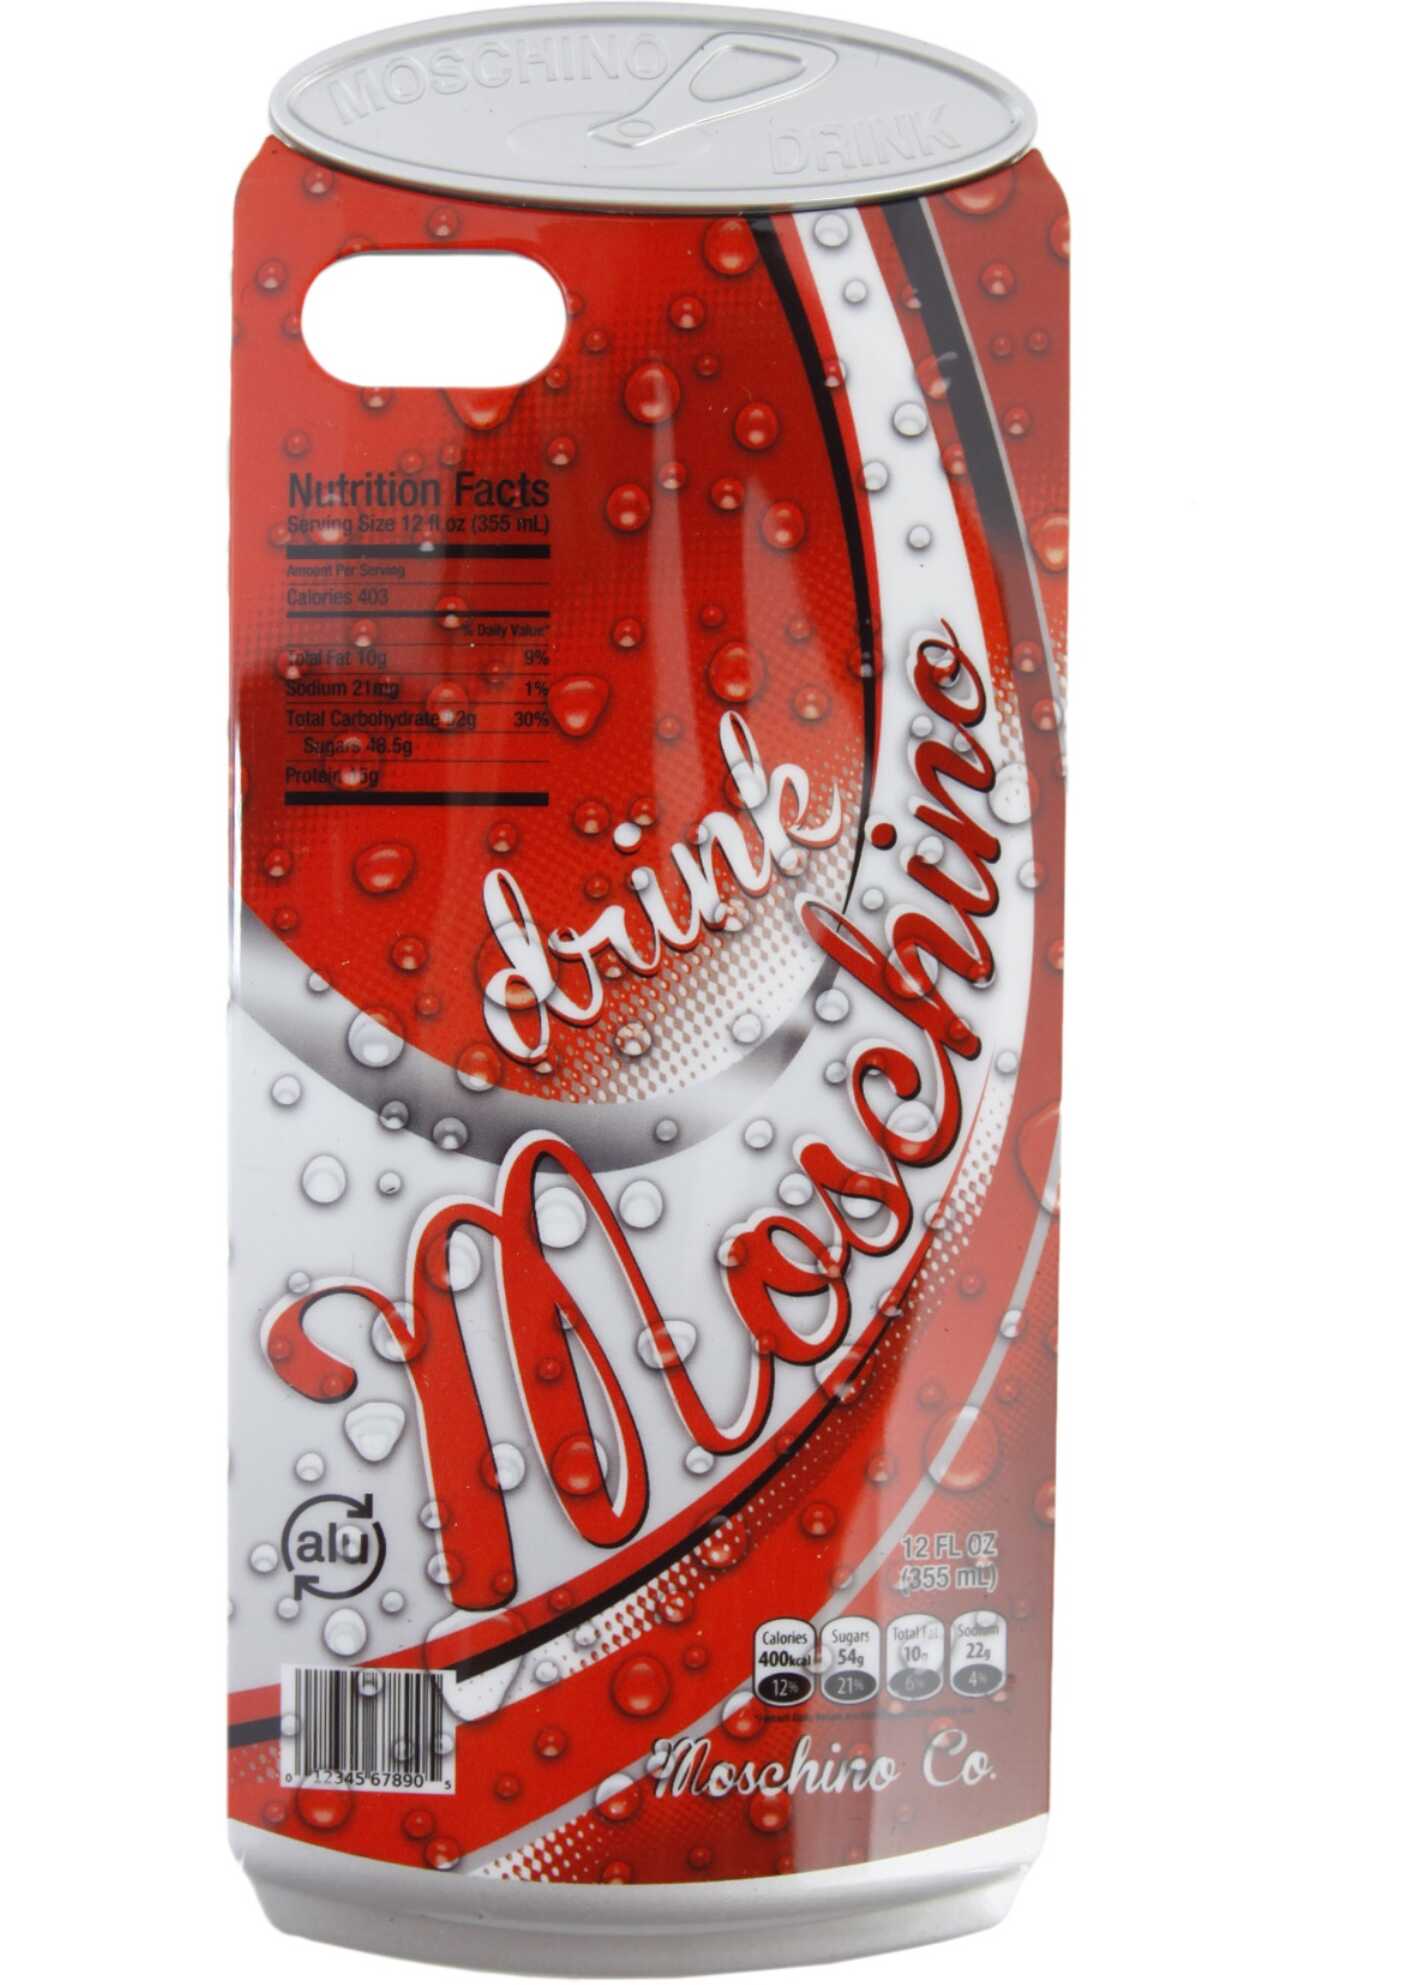 Moschino Cola Case RED image3